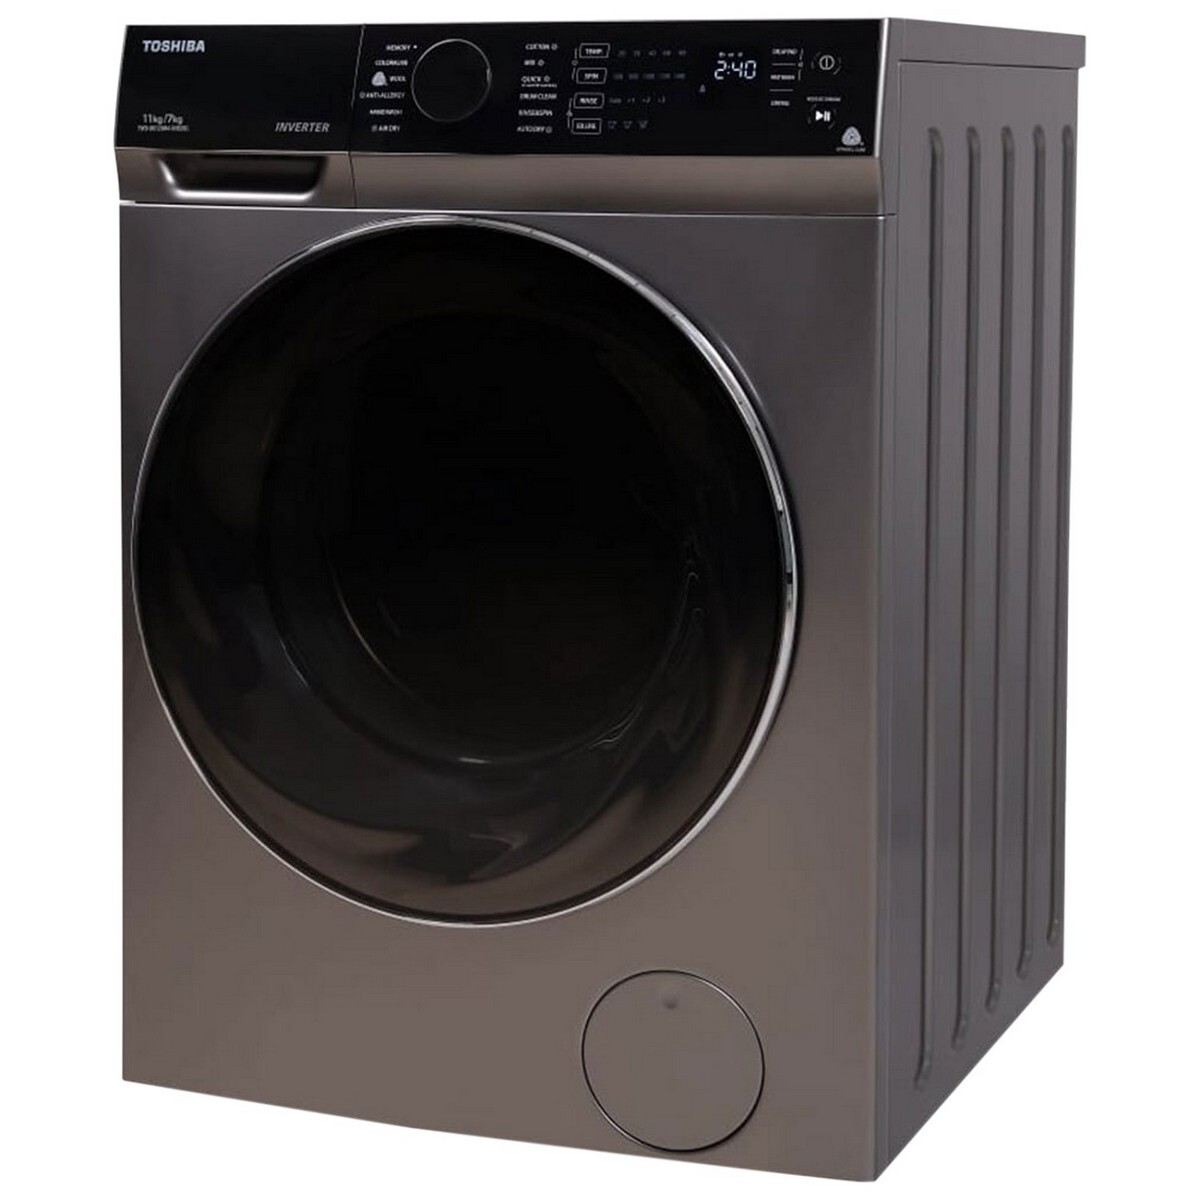 Toshiba Fully Automatic Front Load Washer Dryer BK120M4 11/7Kg Premium Silver